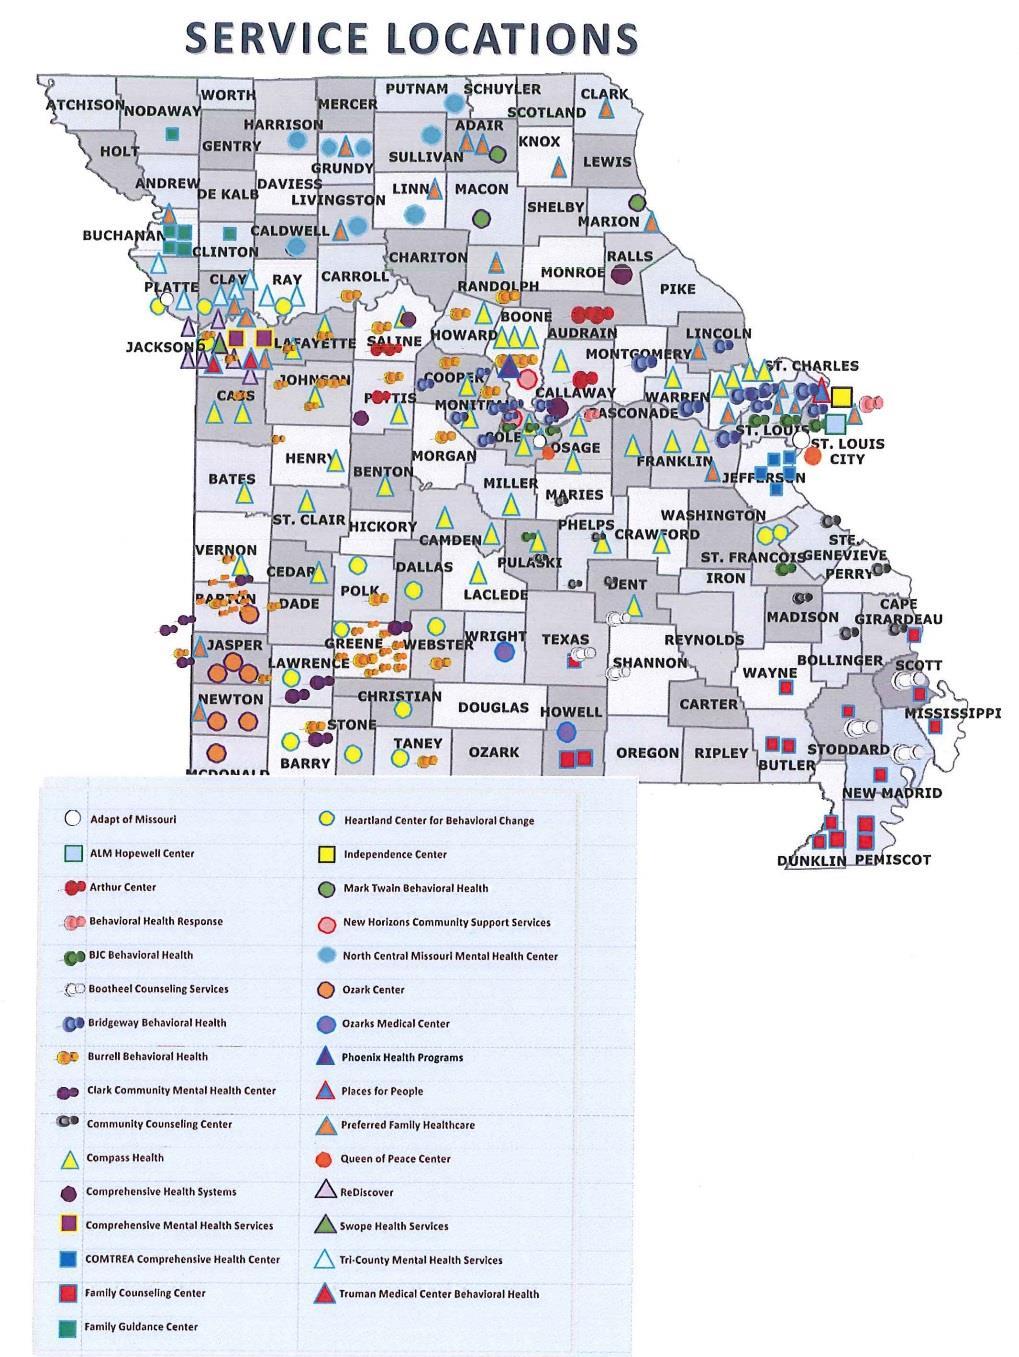 homes. There are 31 agencies who are members of the Coalition. Map 1 provides an overview of these agencies and the services they provide in Missouri.